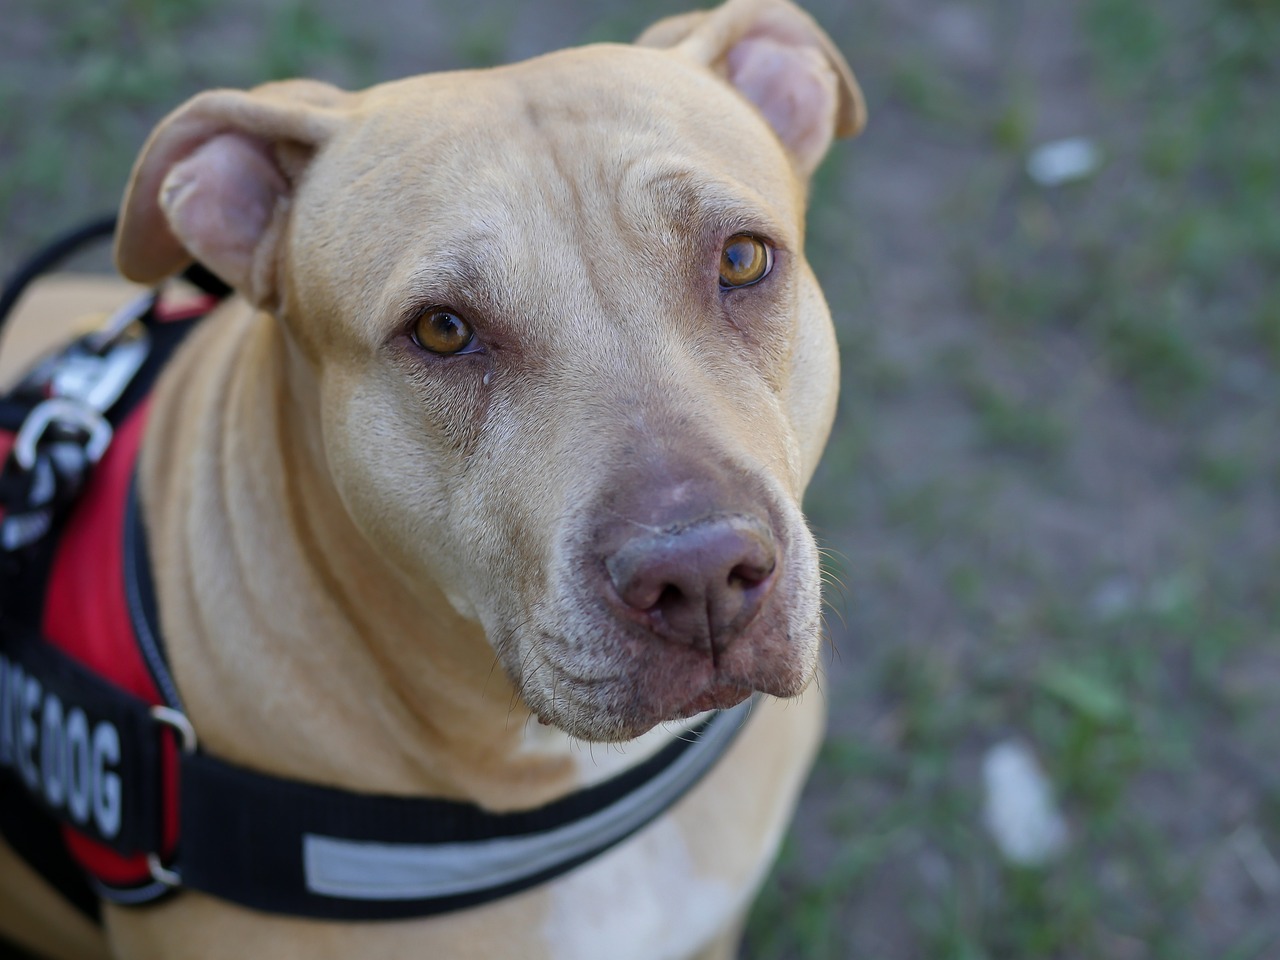 A pitbull wearing a service dog vest stares just past the camera